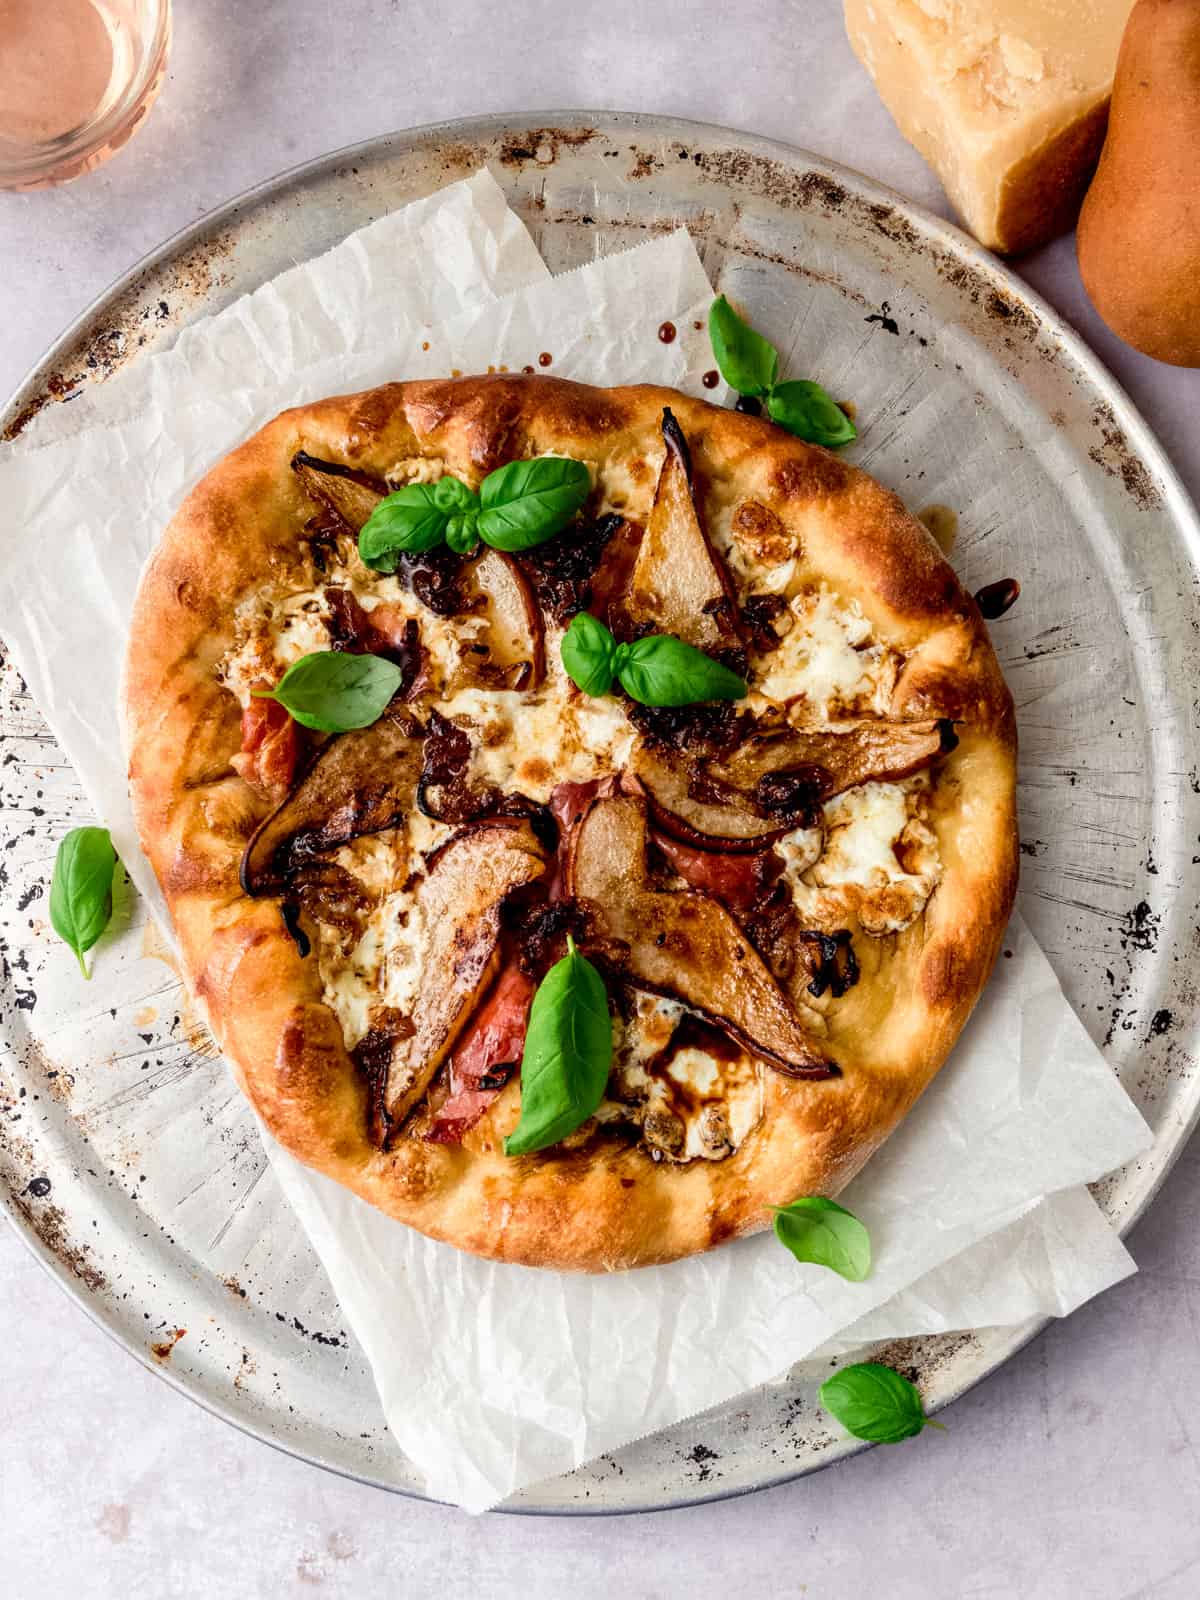 Pear and prosciutto pizza with mozzarella, aged balsamic, caramelized shallots and fresh basil.